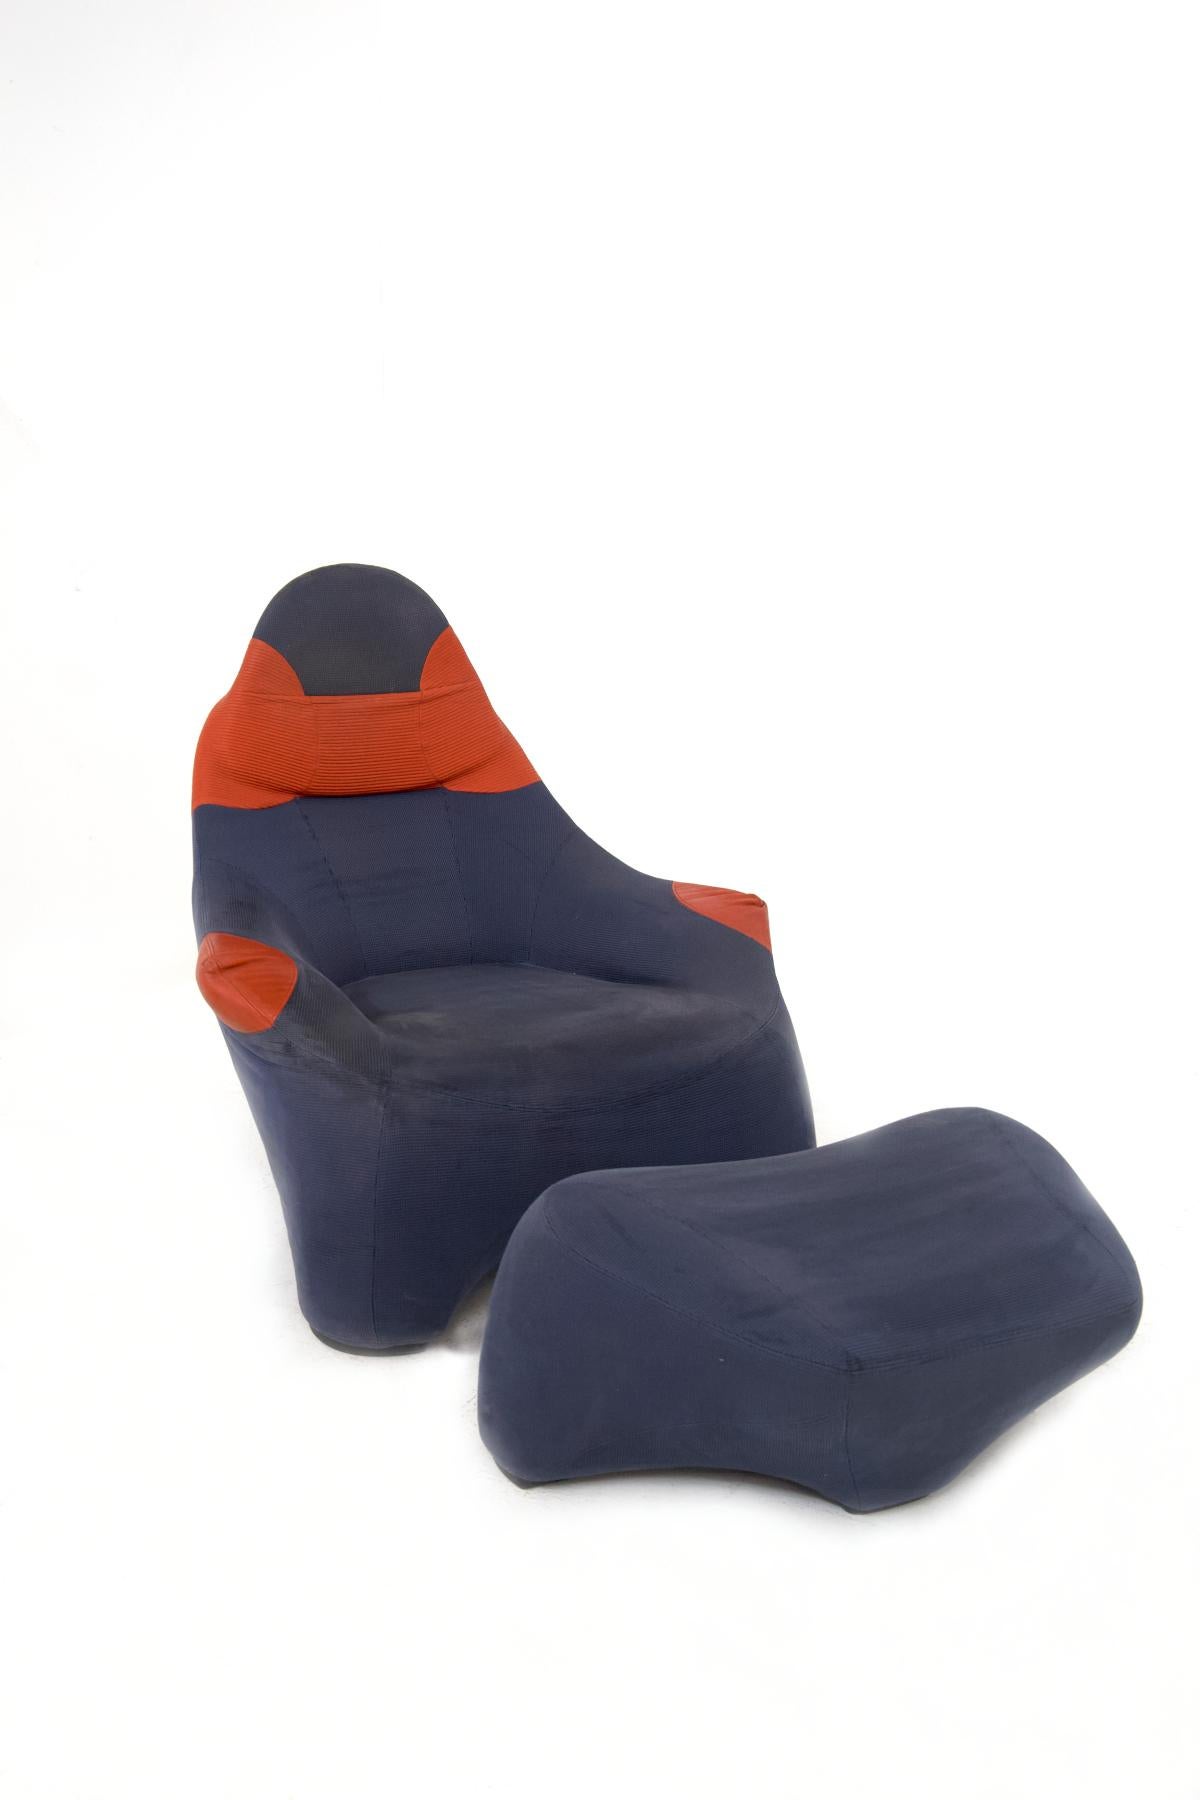 Stunning armchair with footstool model Hal by Marc Sadler for the fine manufacture of Cassina from 1997.
The structure of Hal armchair is in steel with padding in polyurethane foam and polyester wadding. Marc Sadler's armchair is upholstered in